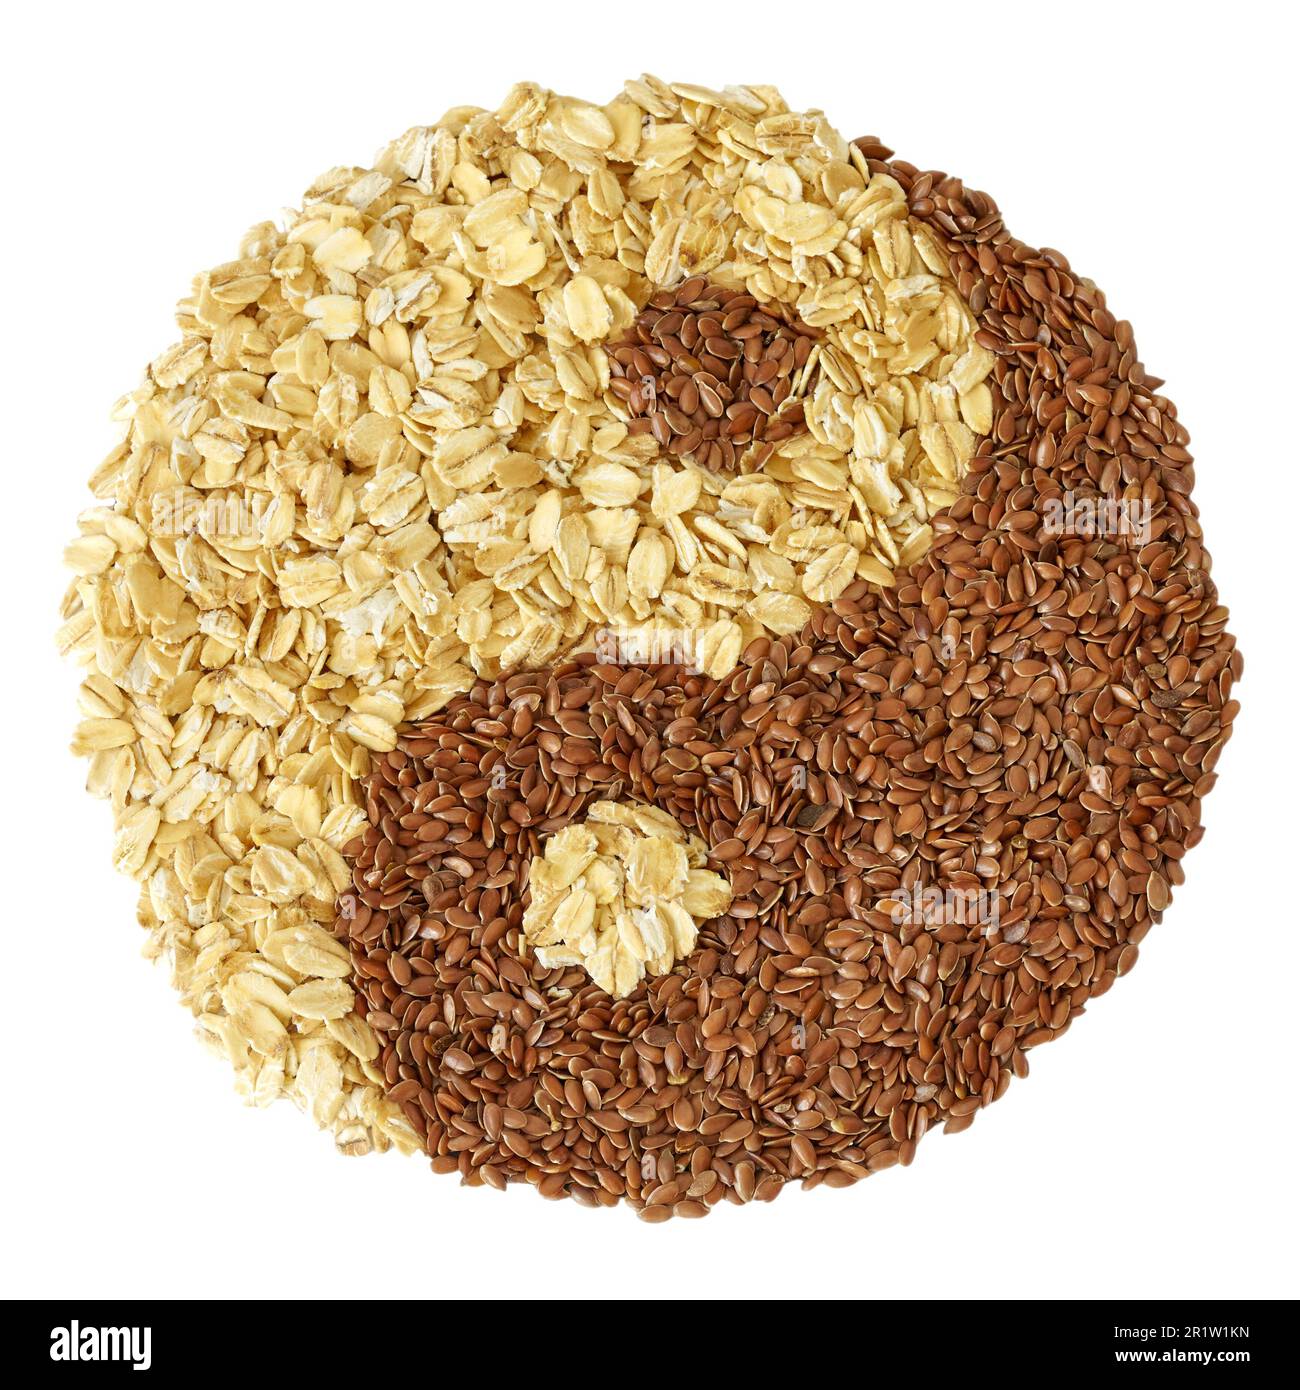 Yin and yang symbol made of flax seeds and whole grain oats isolated on white background. Stock Photo